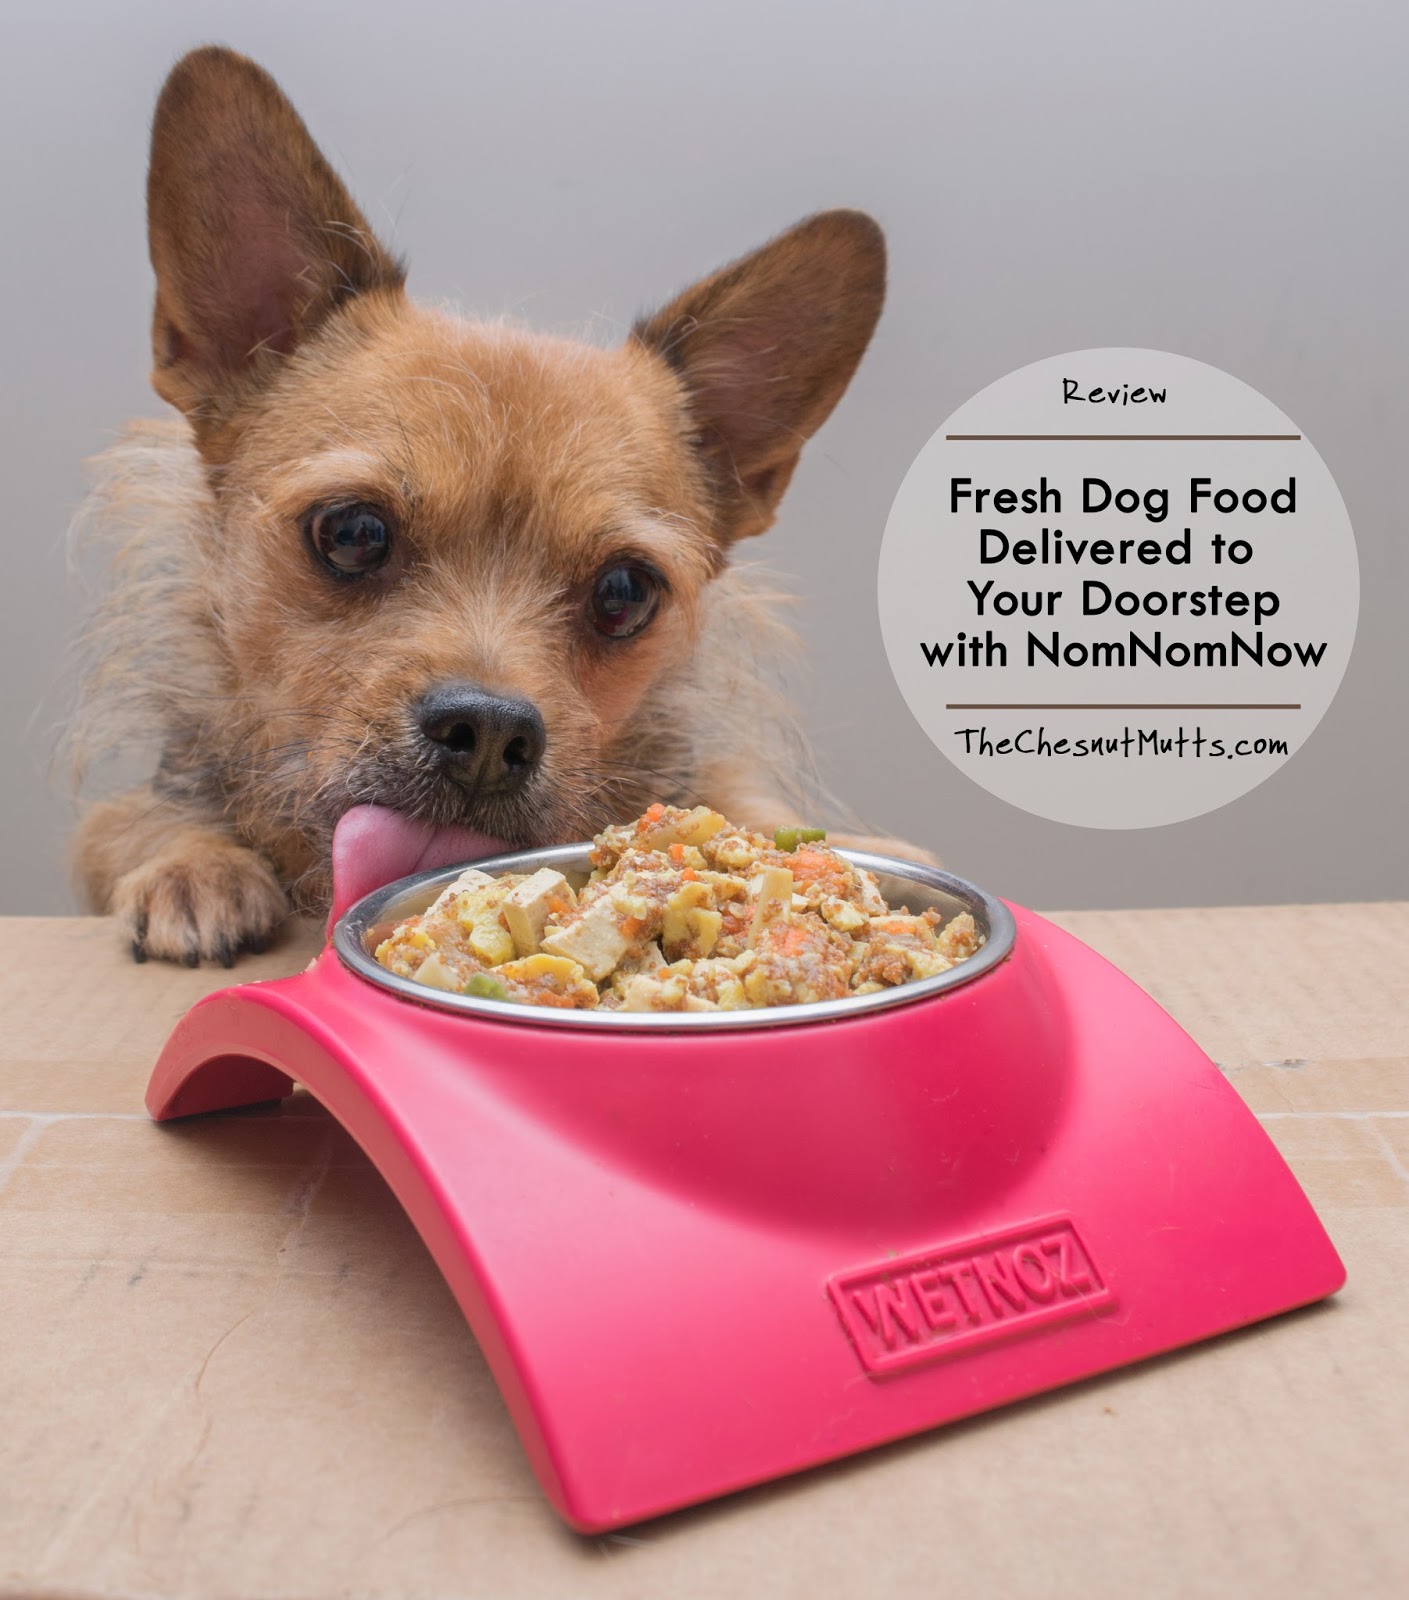 Review Fresh Dog Food Delivered to Your Doorstep with NomNomNow The